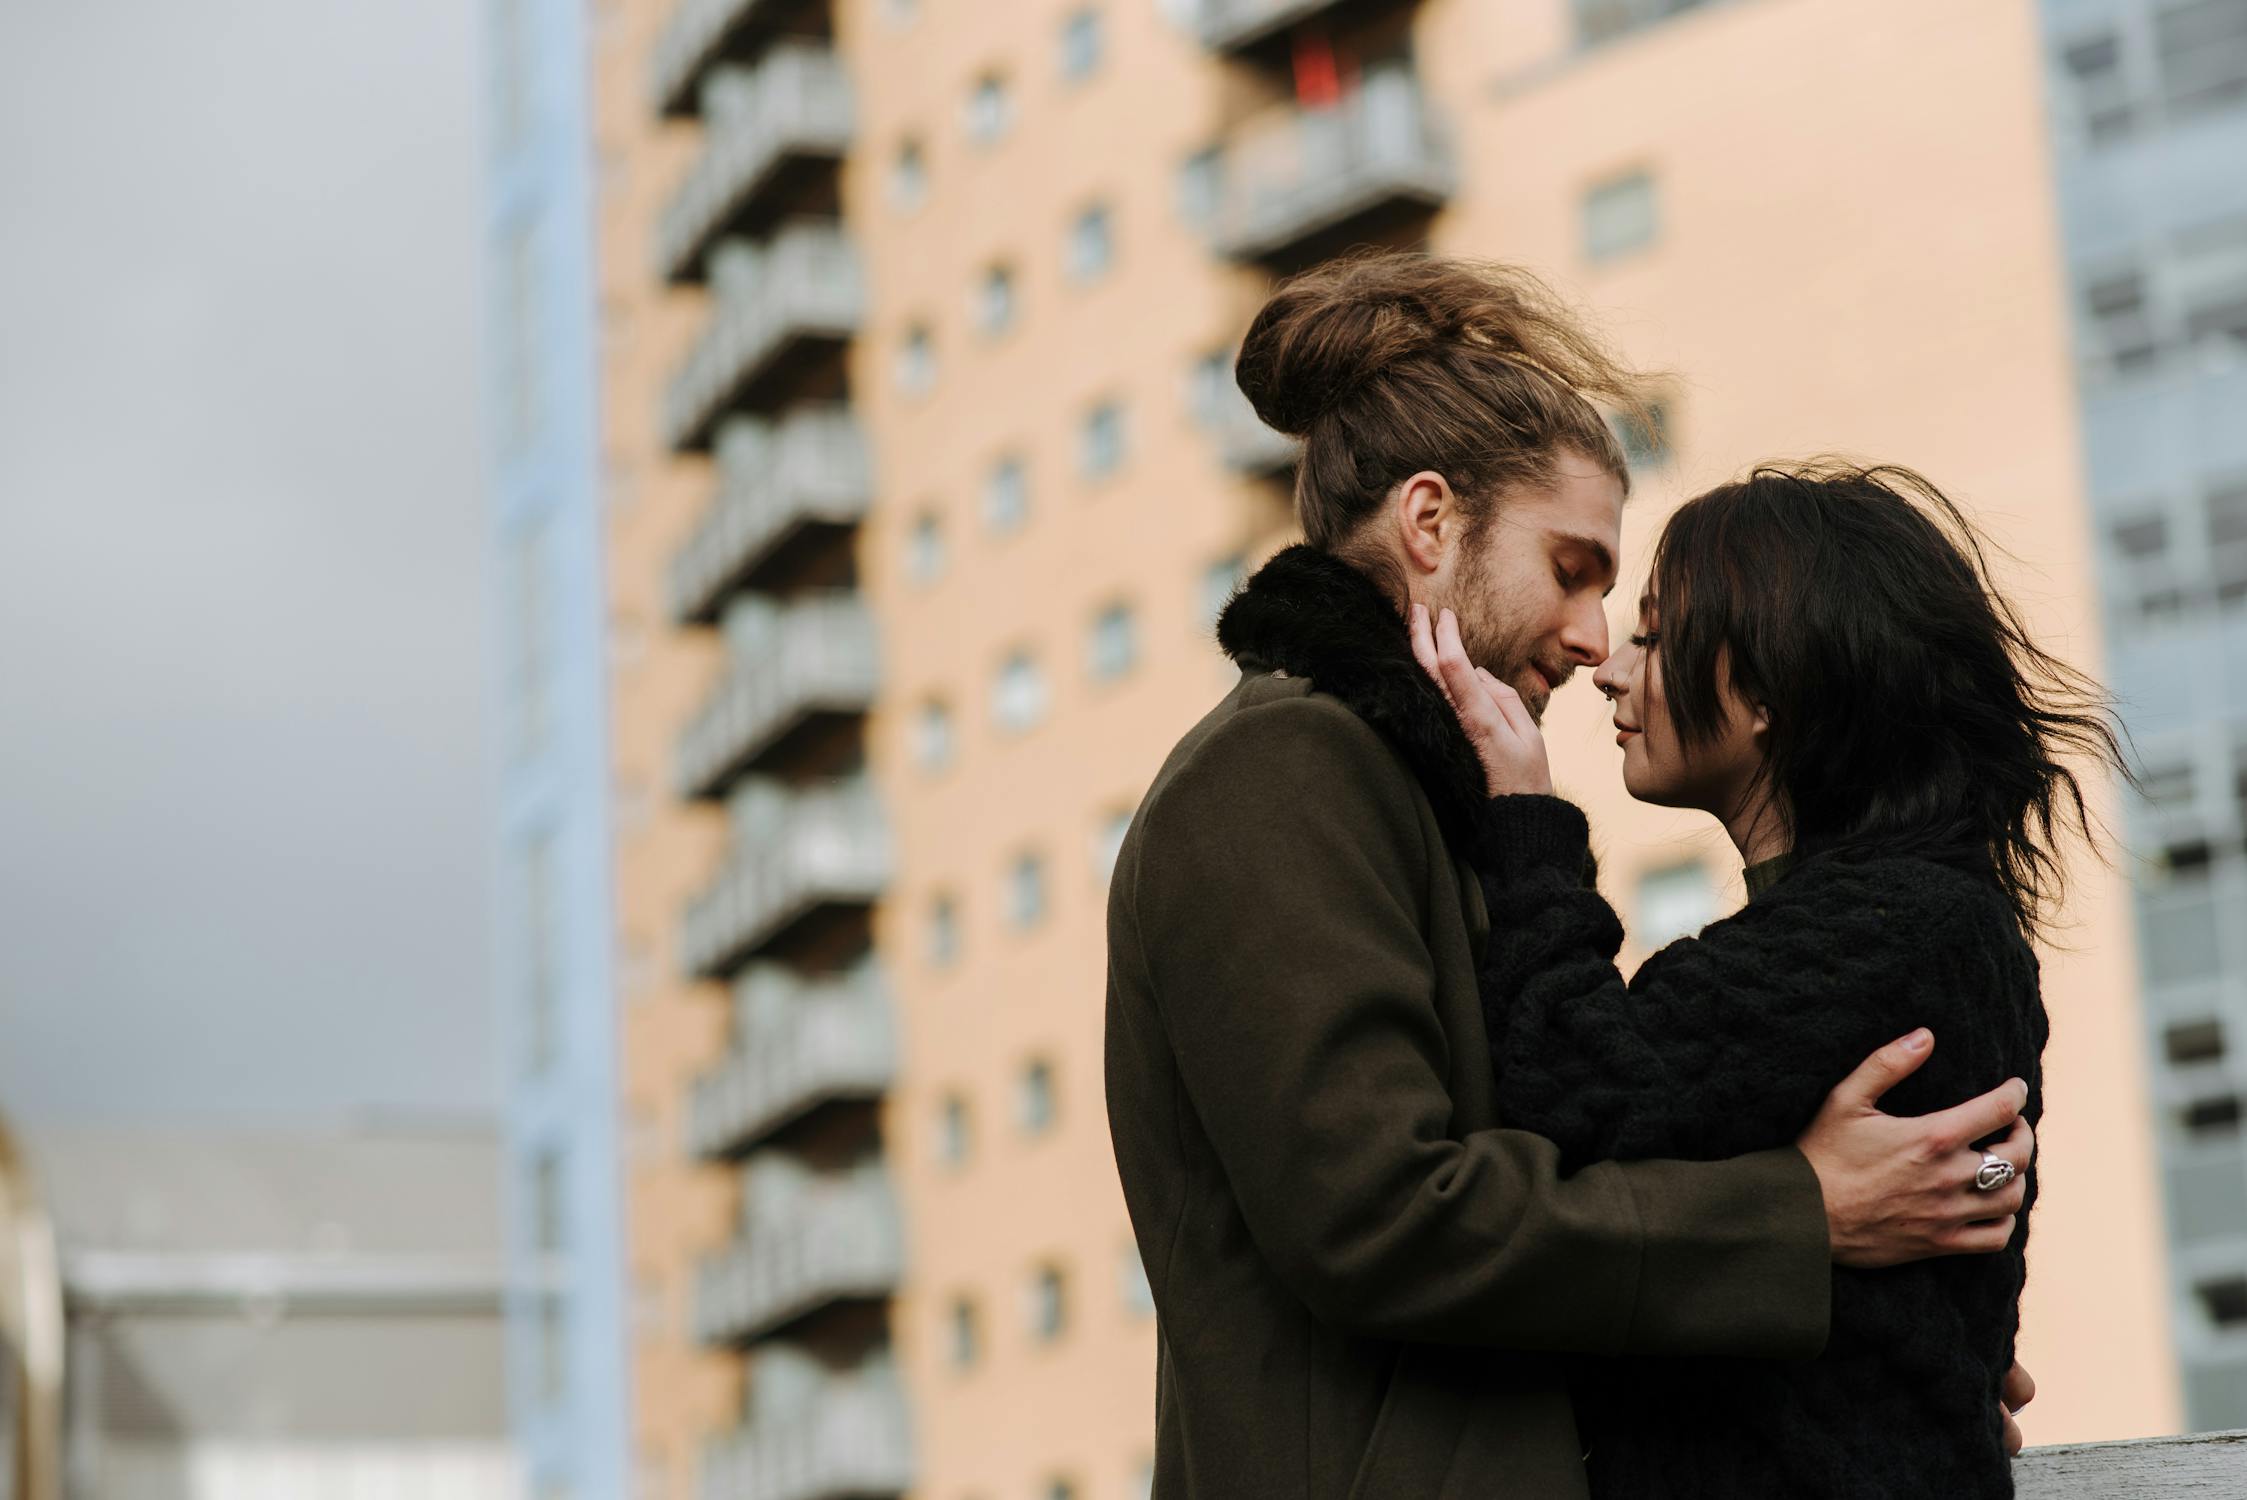 Desire Photo by Anete Lusina from Pexels: https://www.pexels.com/photo/loving-couple-caressing-on-street-5722937/